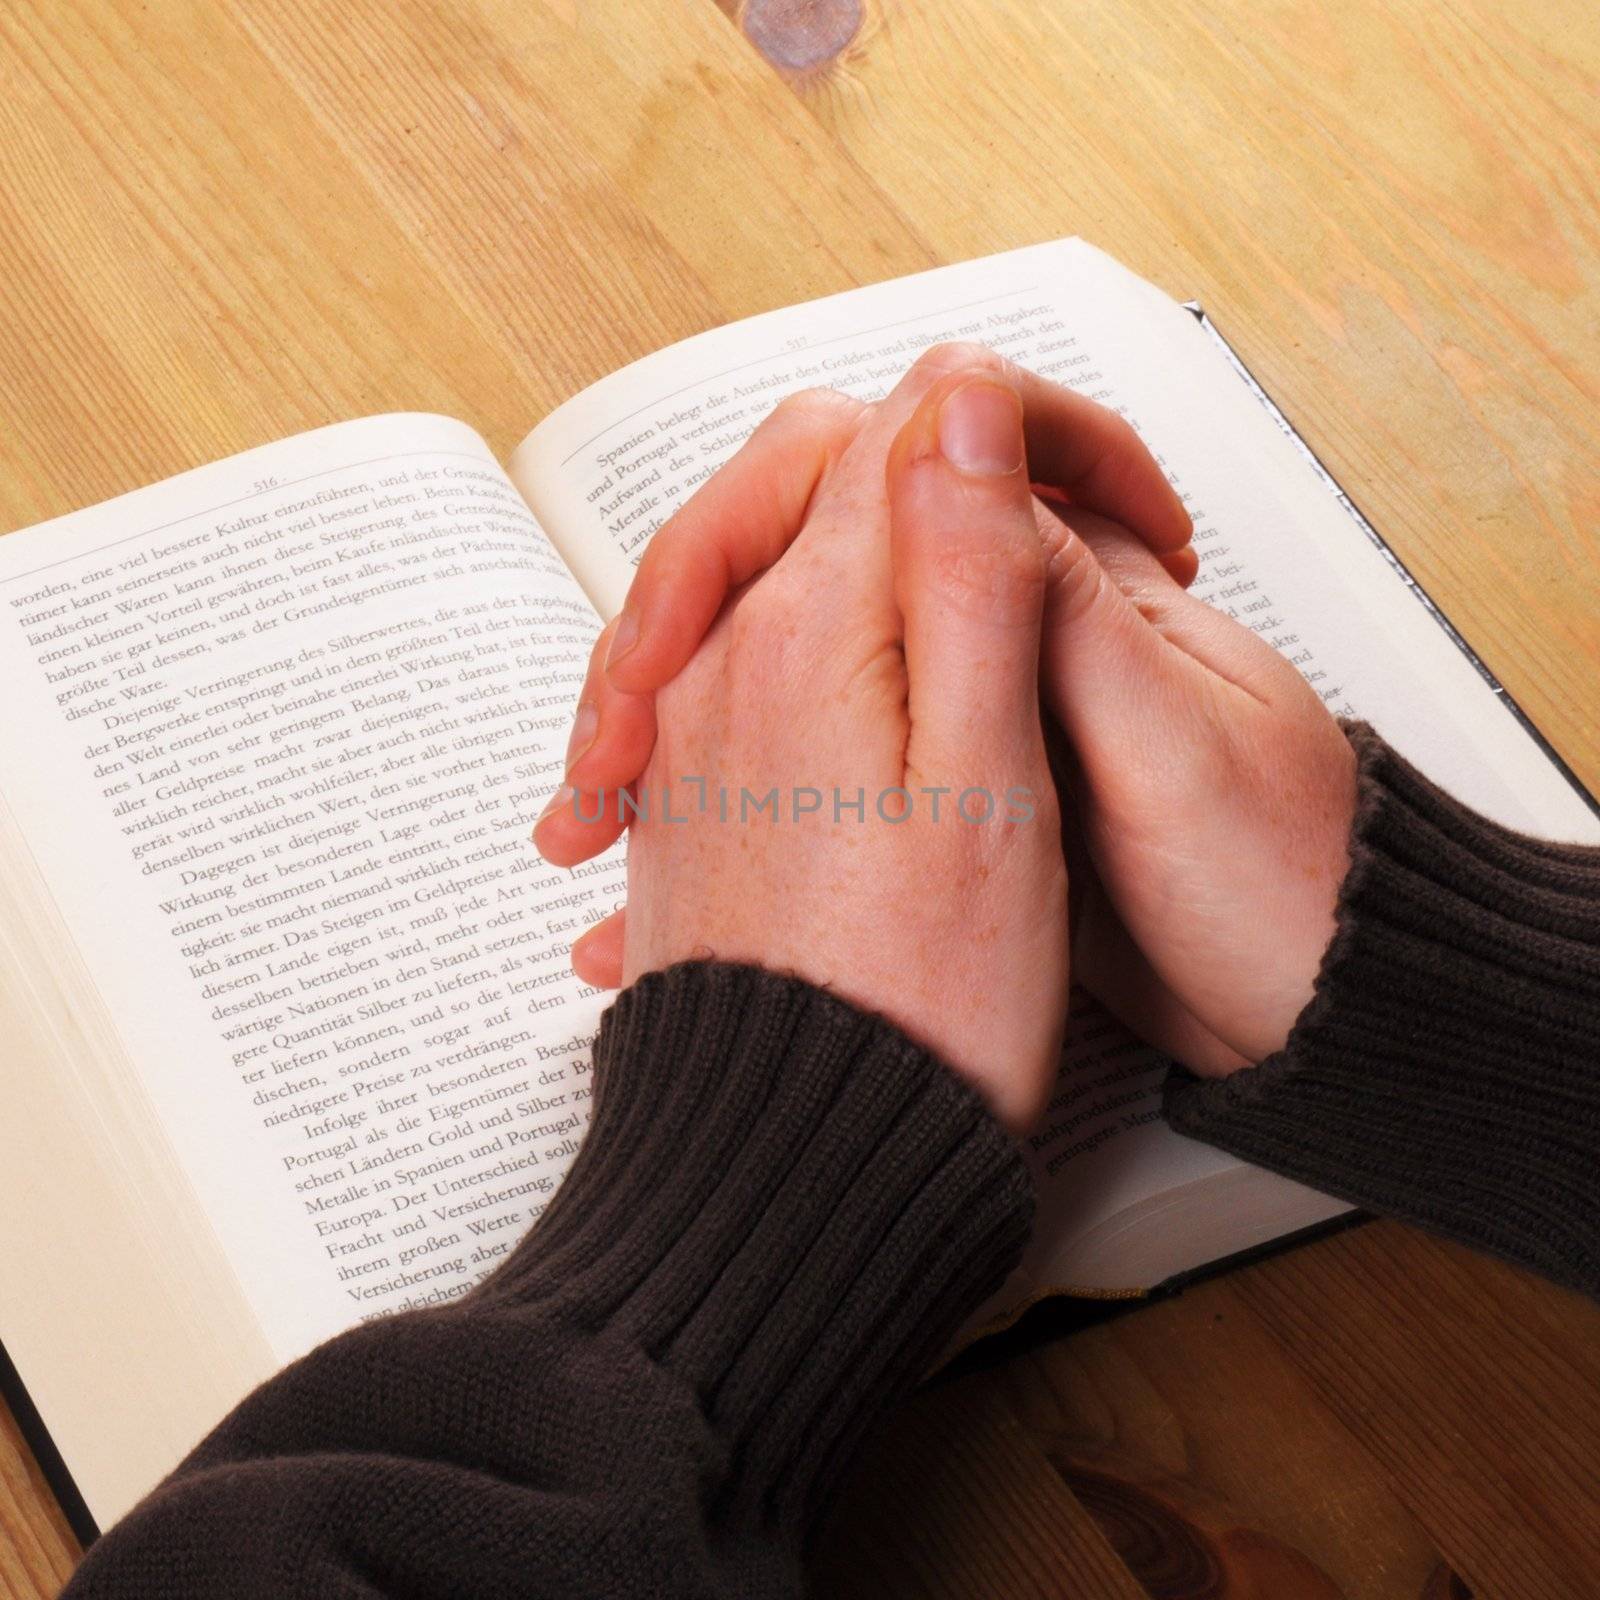 praying hand and book on desk showing religion concept